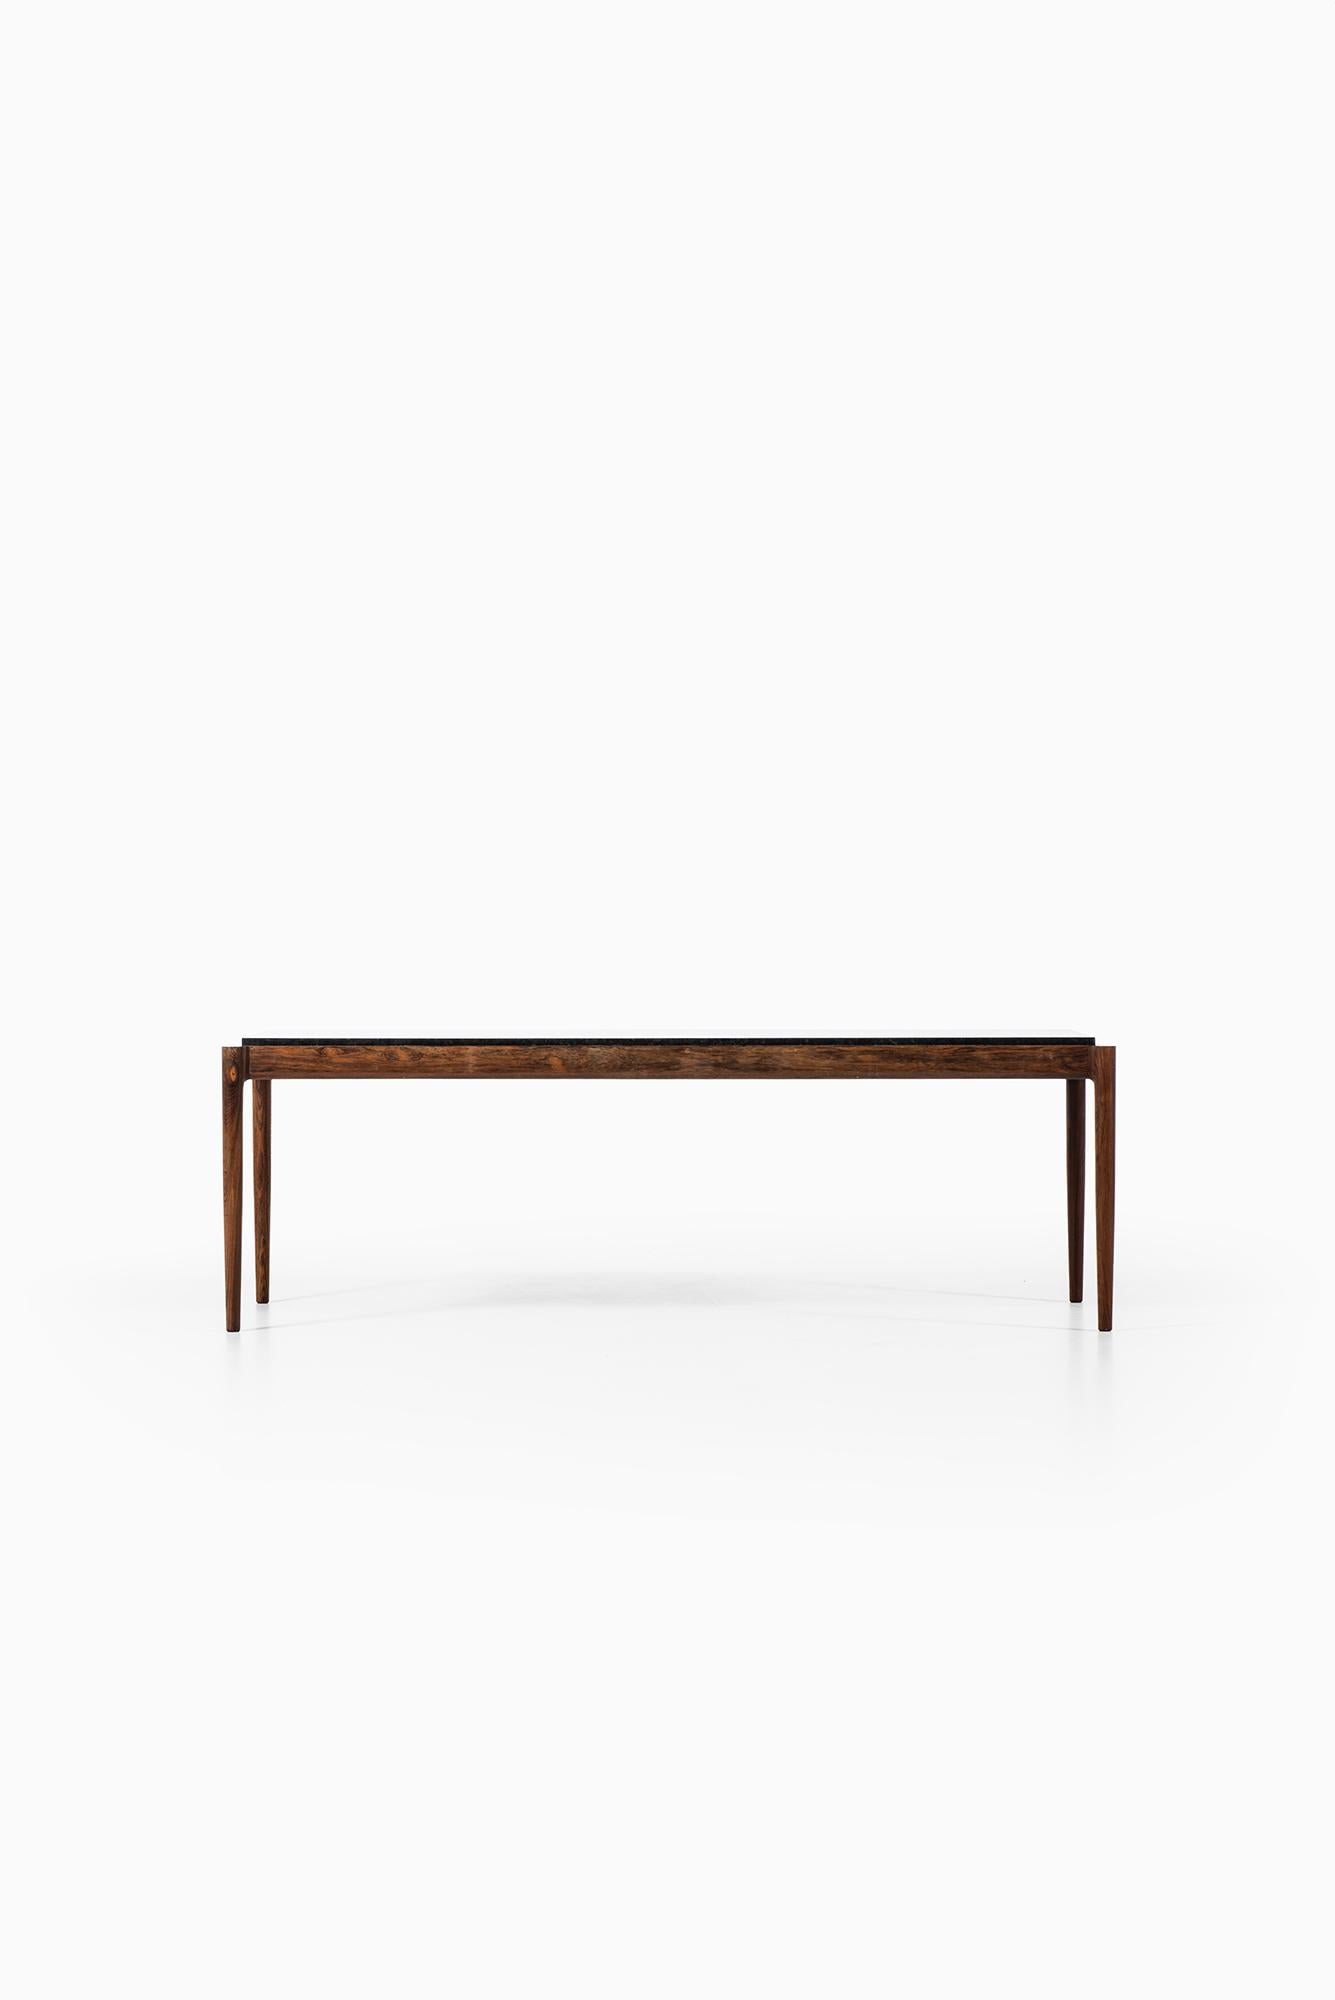 Rare coffee table designed by Ib Kofod-Larsen. Produced by Seffle Möbelfabrik in Sweden.